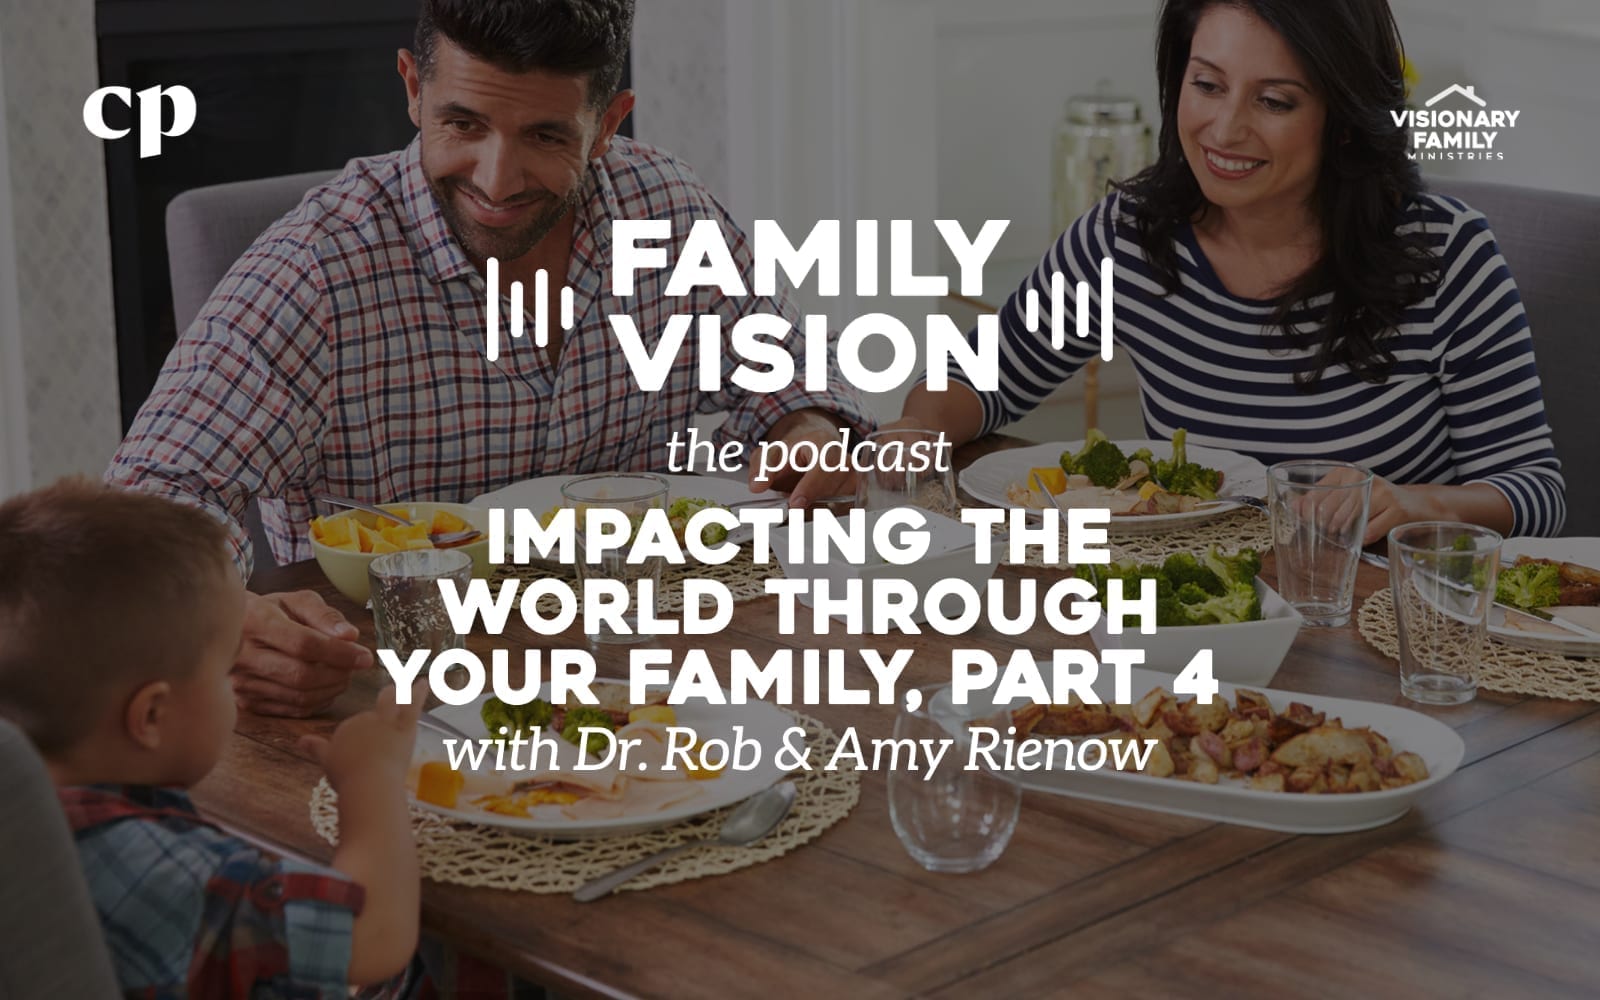 Impacting the World Through Your Family, Part 4